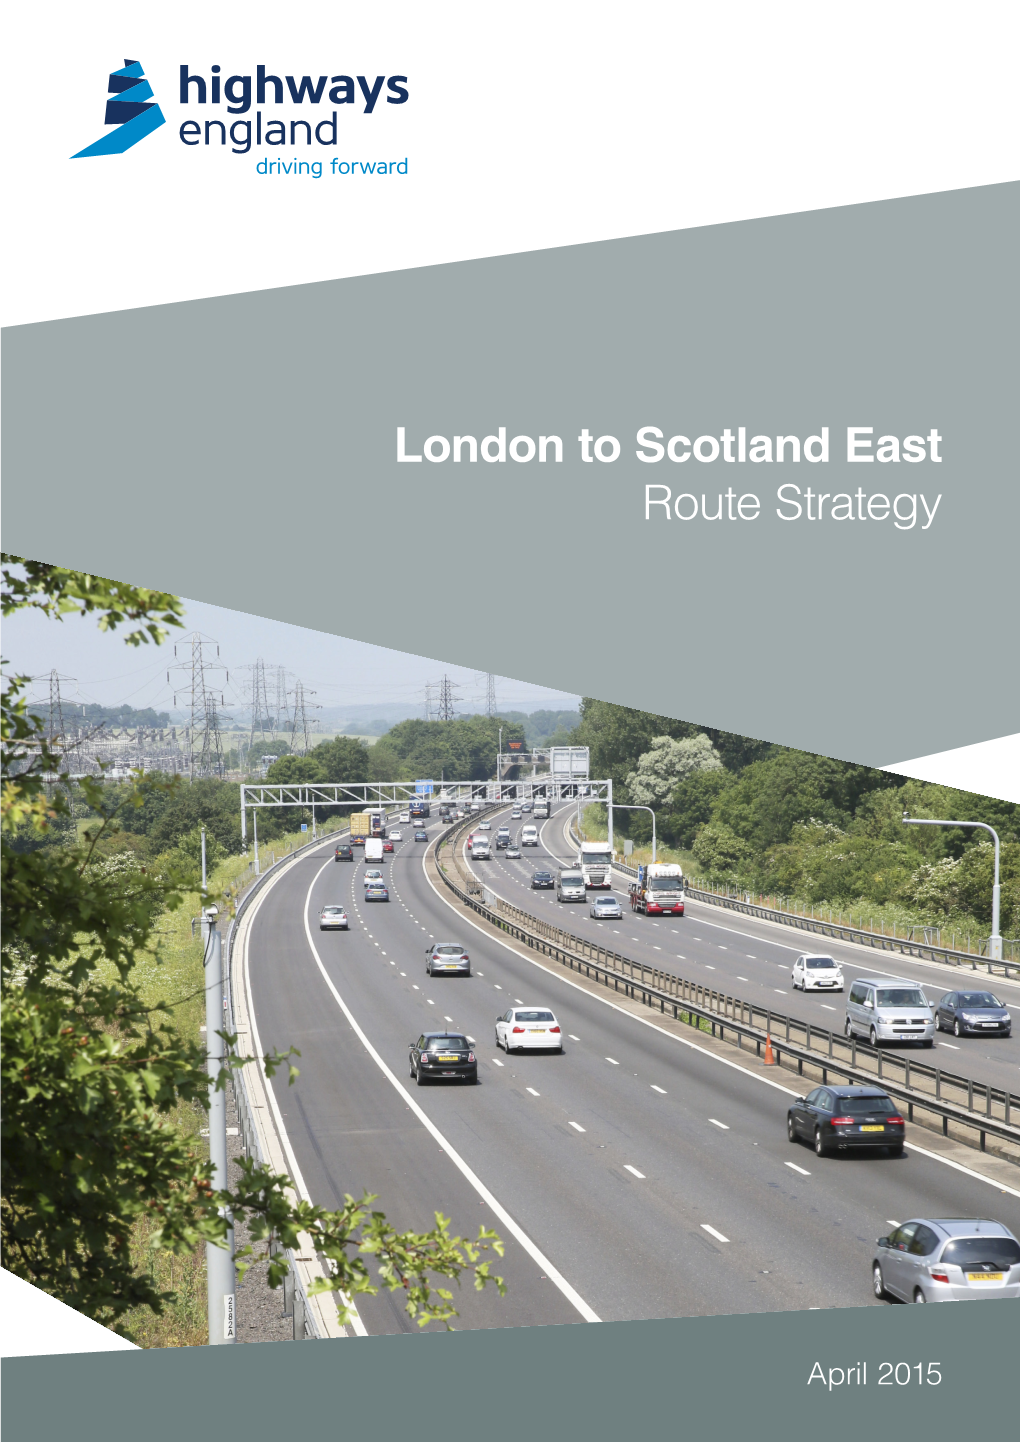 London to Scotland East Route Strategy